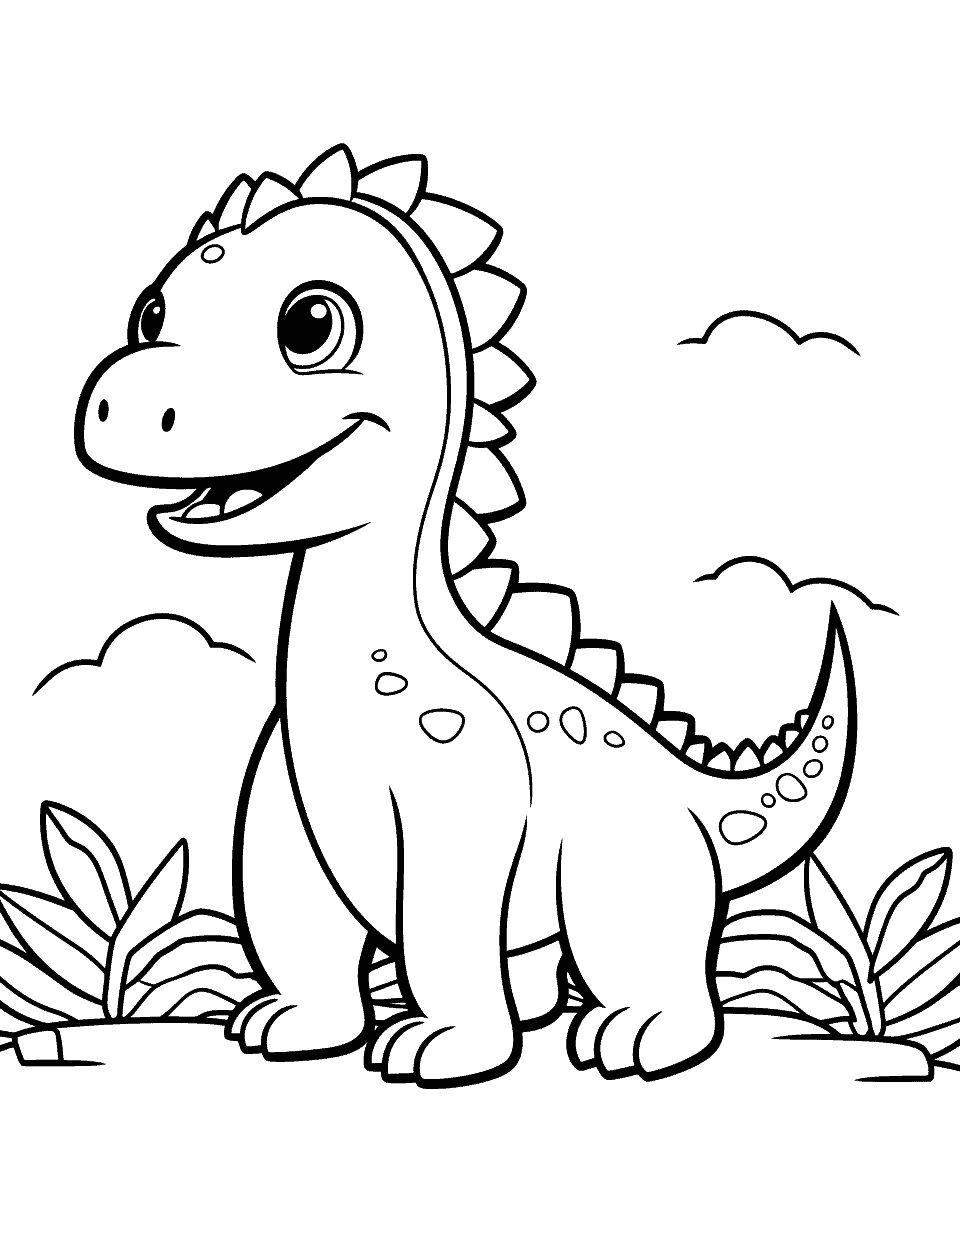 Easy Dino Drawing Dinosaur Coloring Page - An easy-to-color Dino drawing suitable for younger kids.